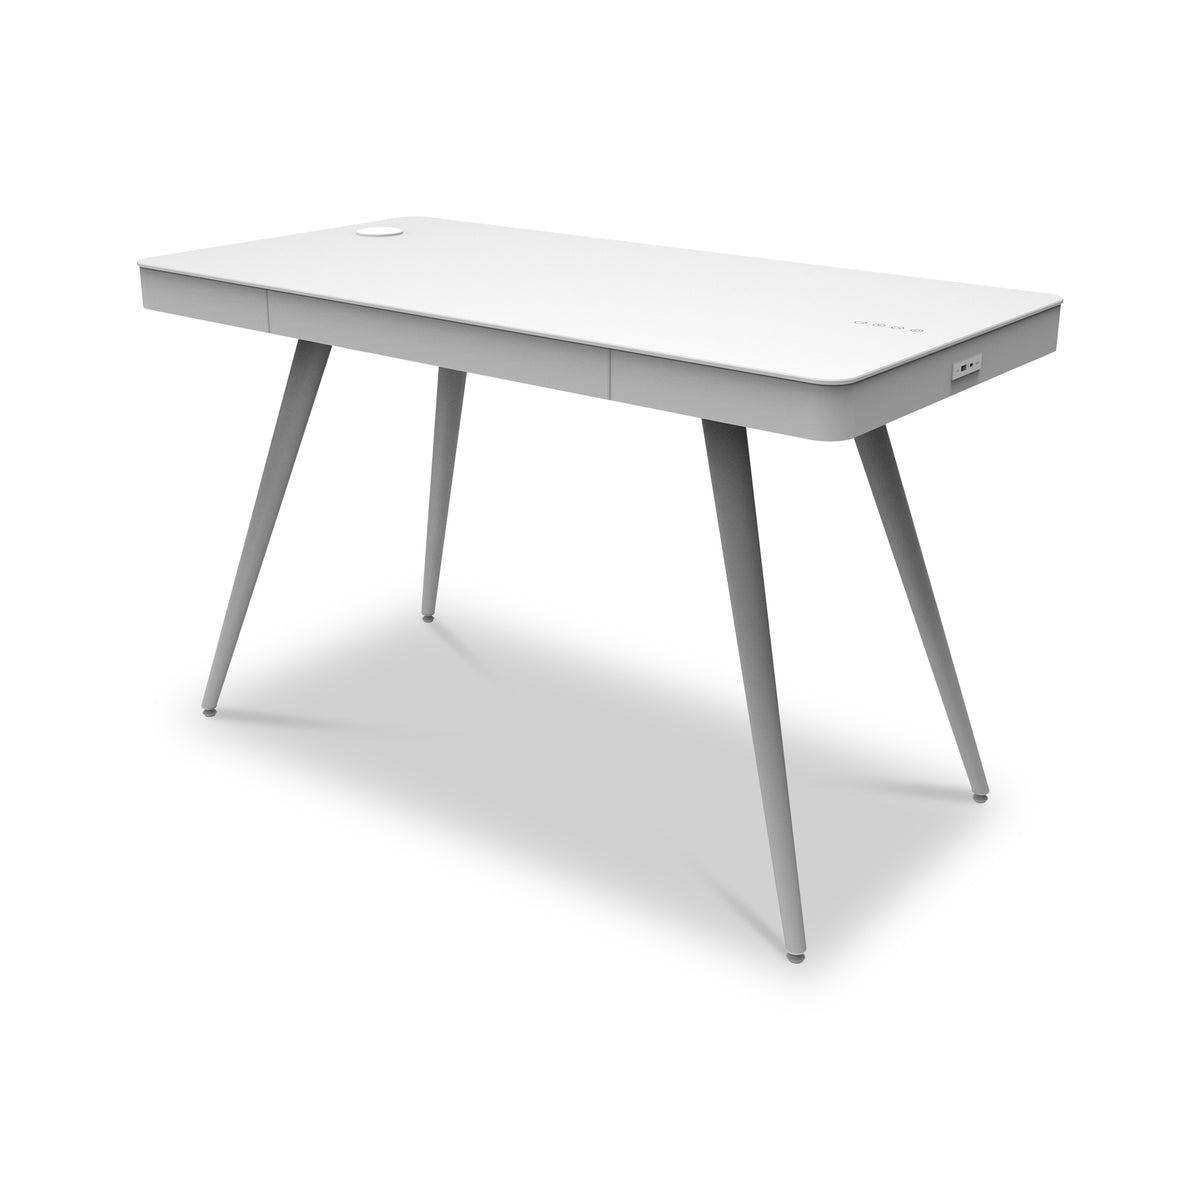 Tori 4.0 White Smart Desk with Wireless Charging & Bluetooth Speaker from Roseland Furniture